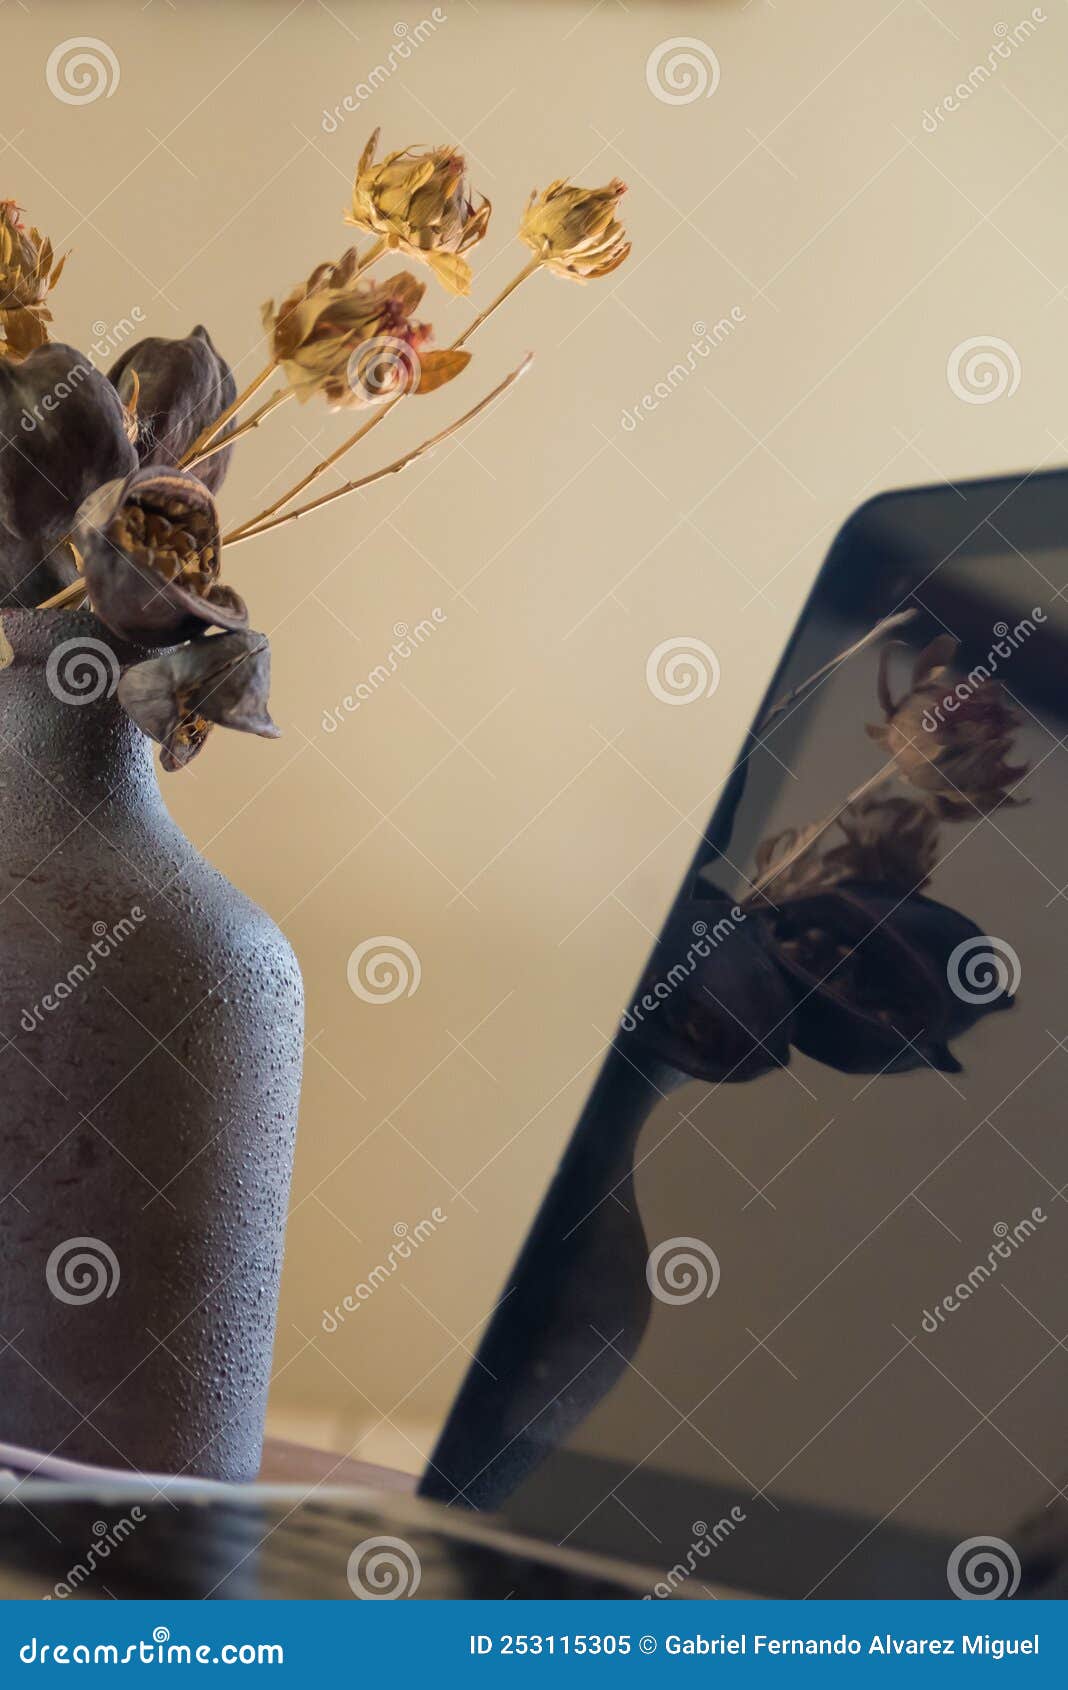 vase with dried flowers in front of a mirror